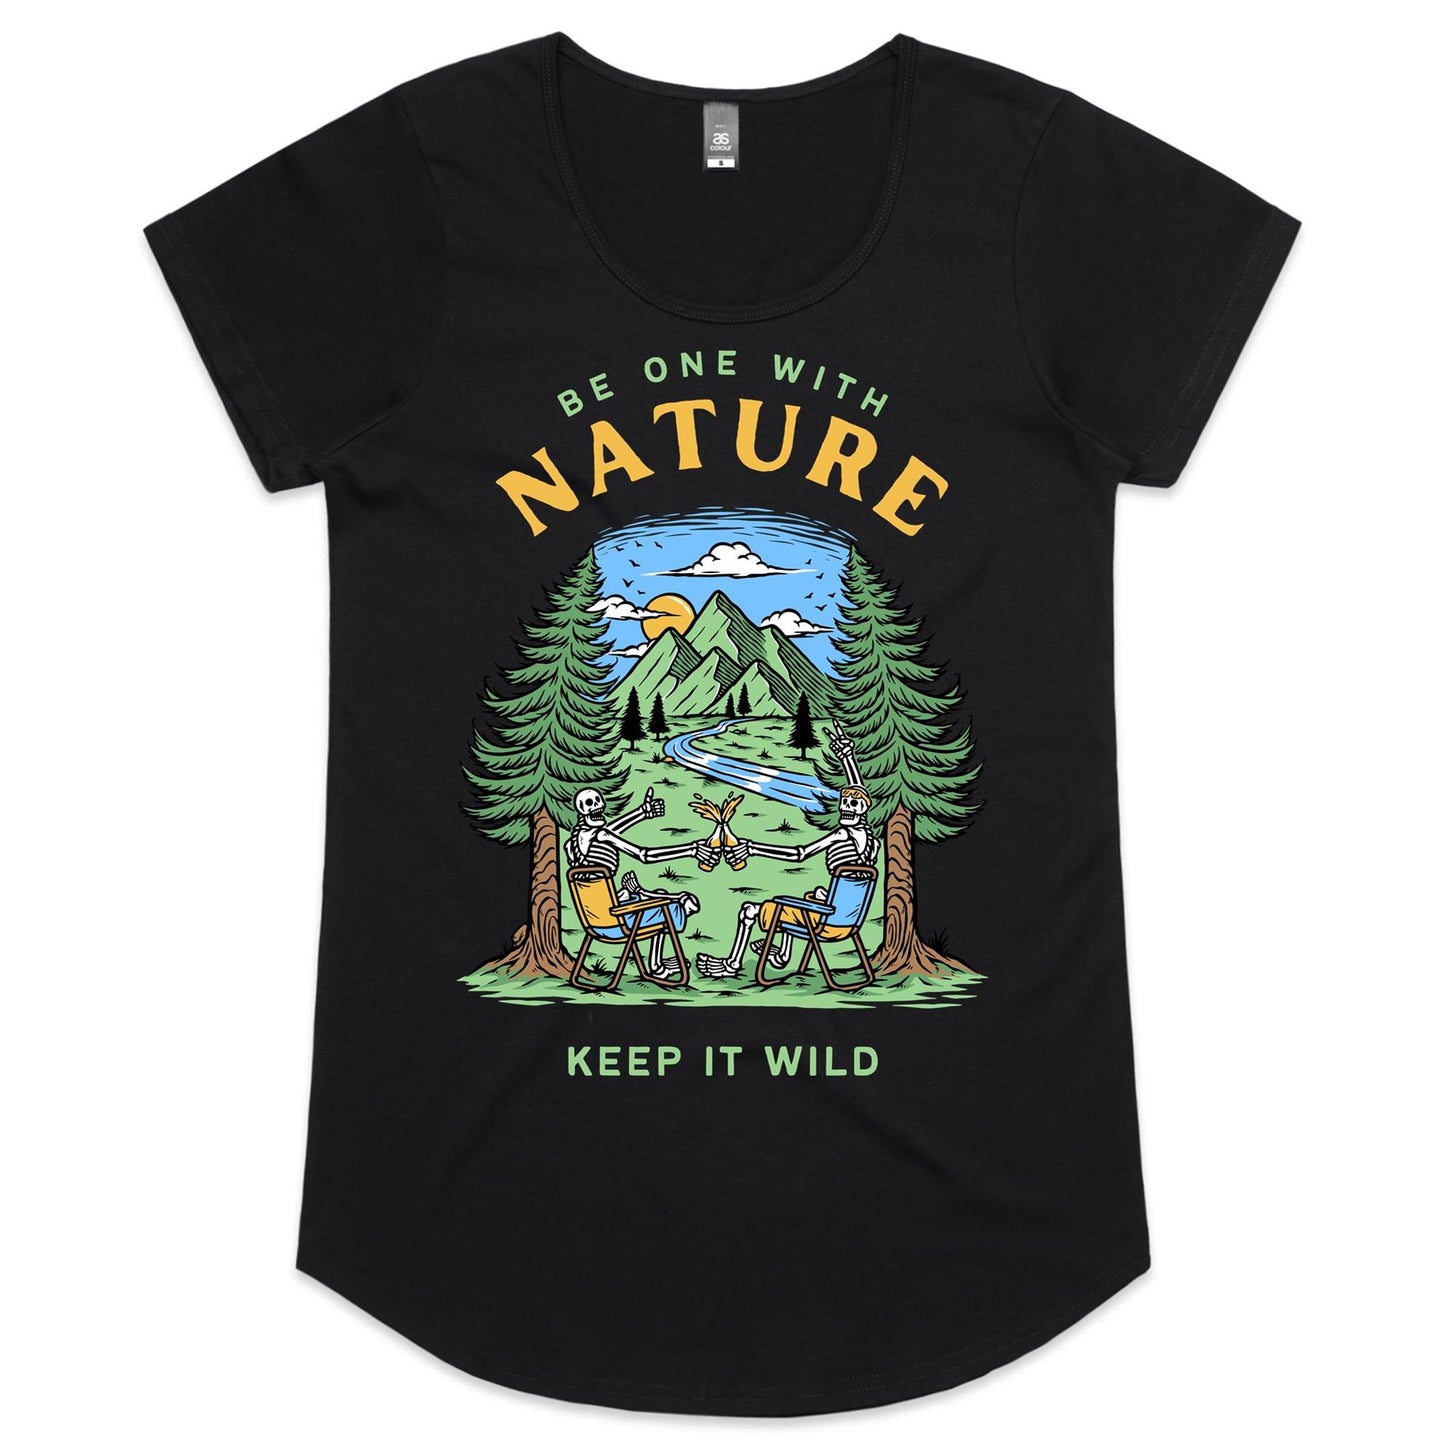 Be Ones With Nature, Skeleton - Womens Scoop Neck T-Shirt Black Womens Scoop Neck T-shirt Environment Summer